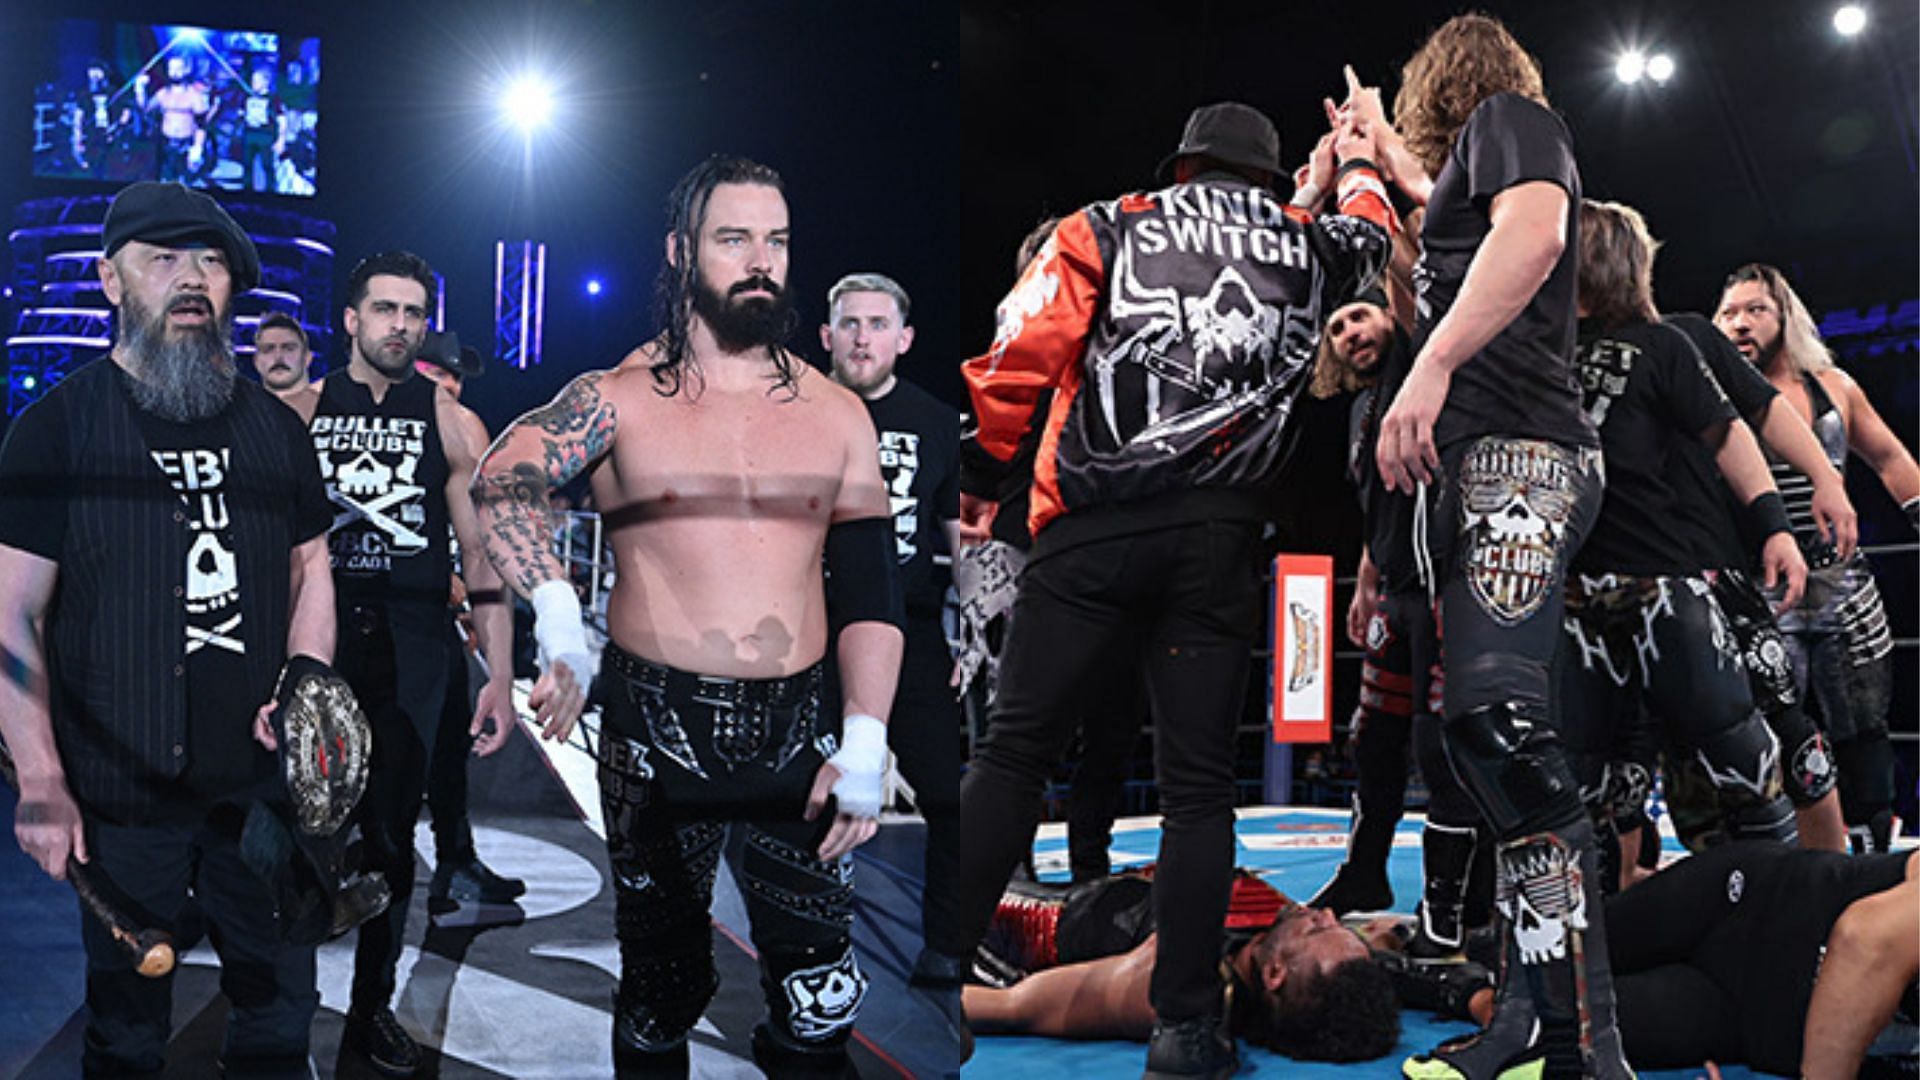 The Bullet Club has added a new member, who has aligned with the House of Torture